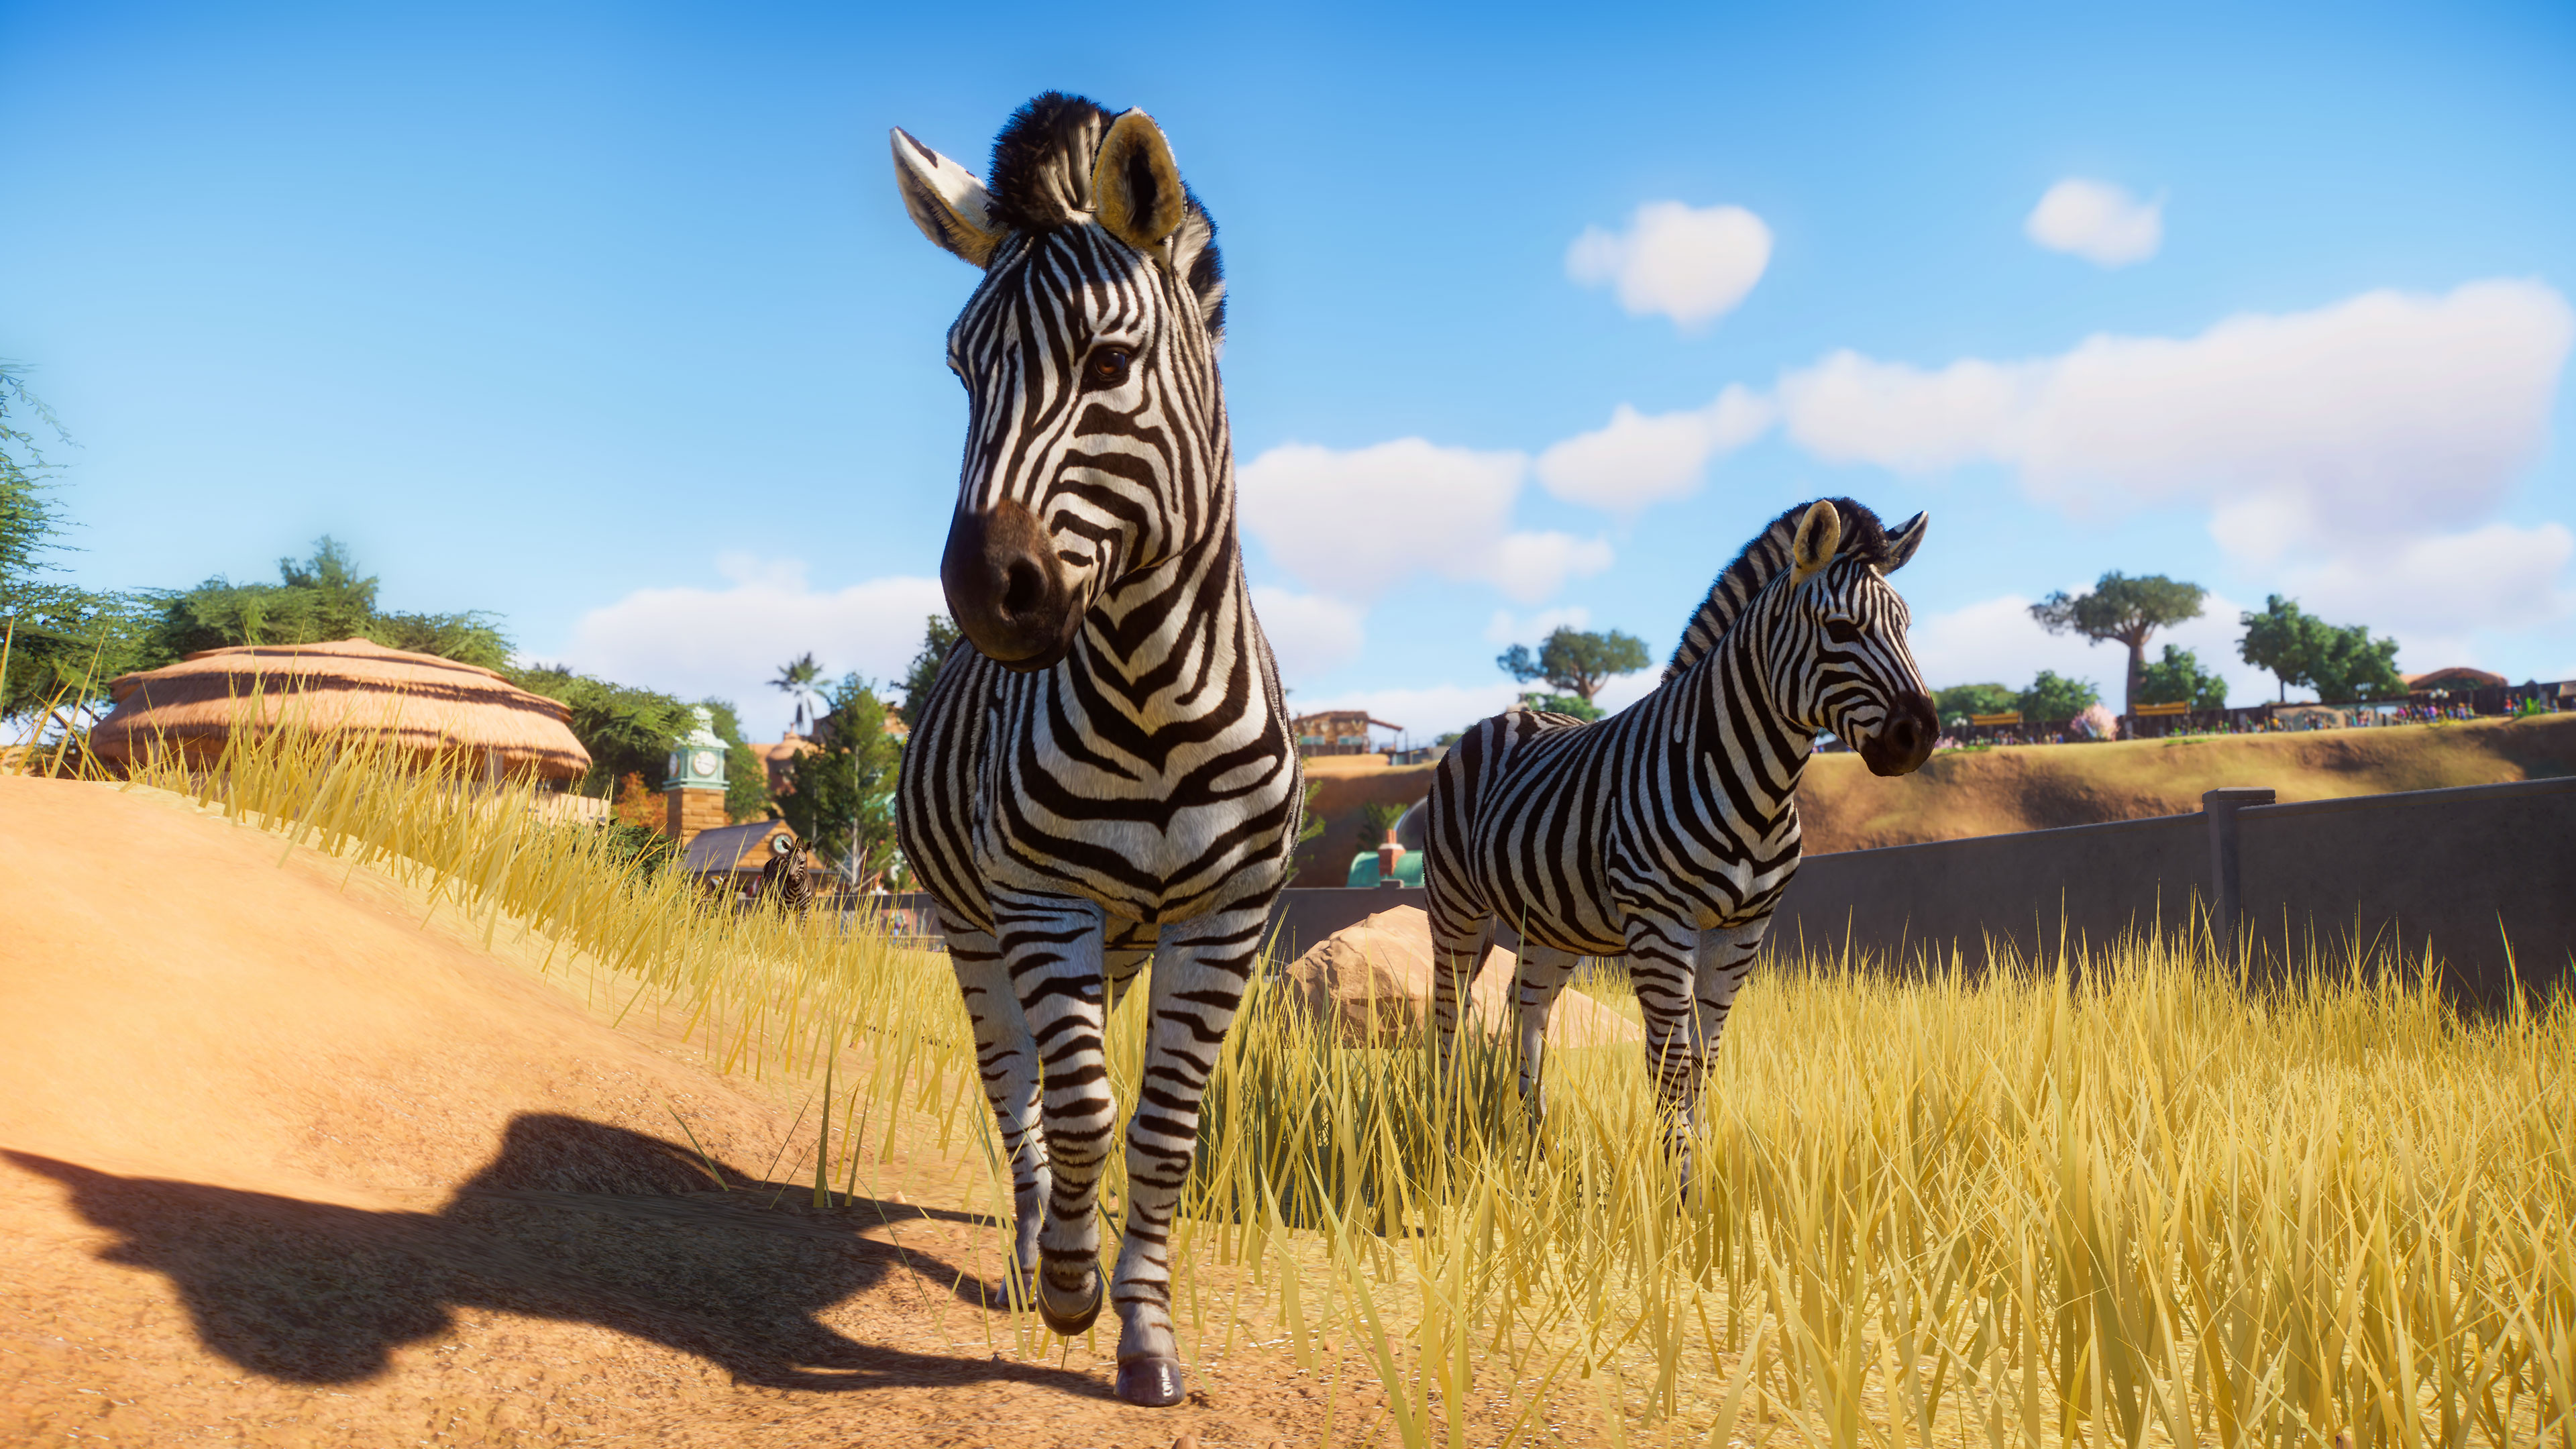 Planet Zoo is a tycoon game striving for perfect animal realism | PC Gamer